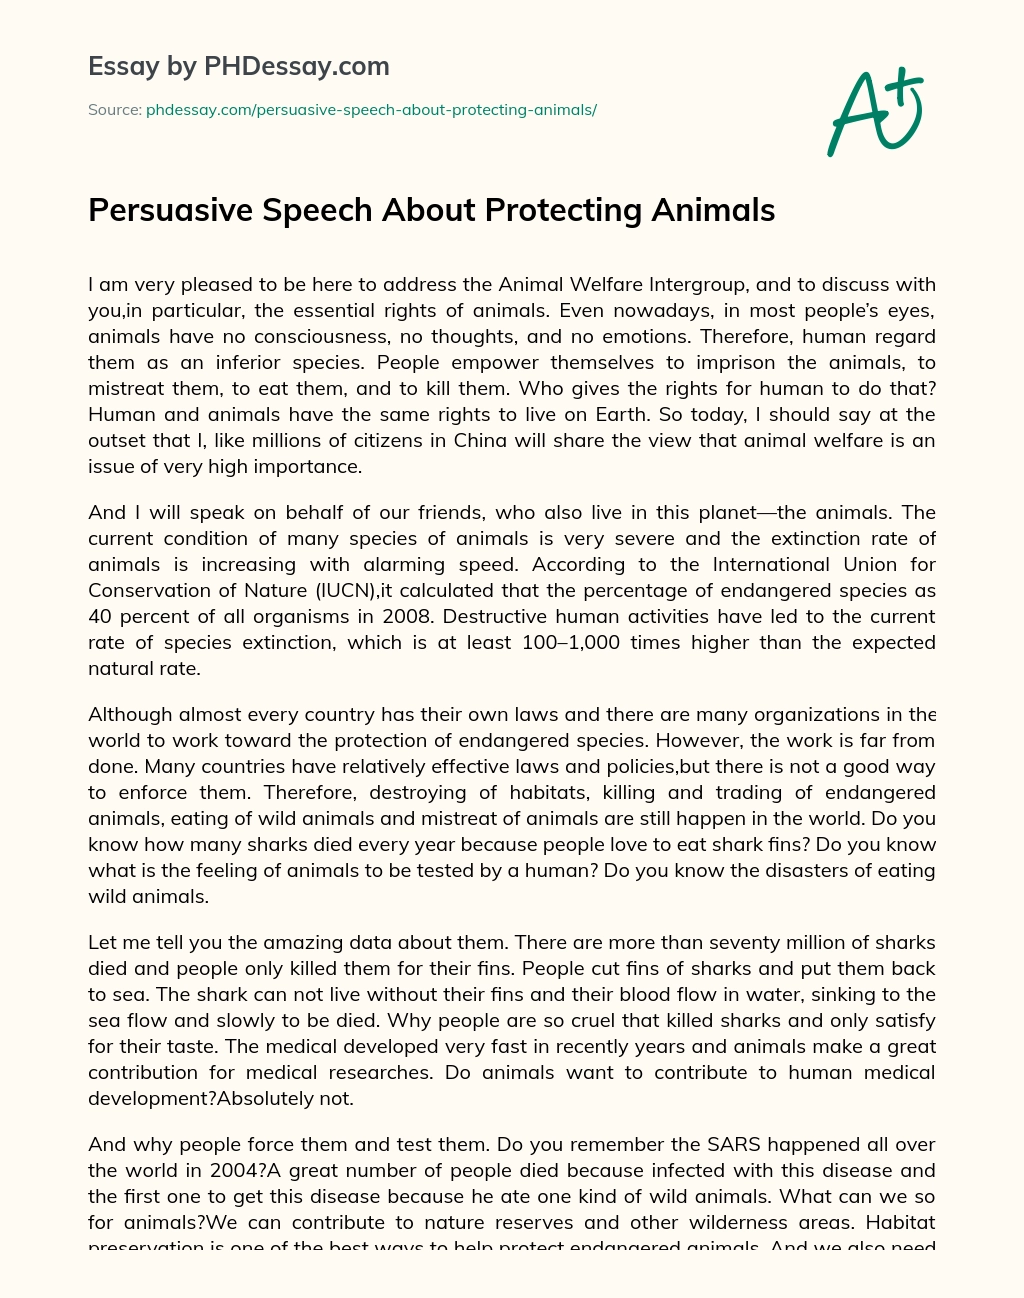 Persuasive Speech About Protecting Animals 